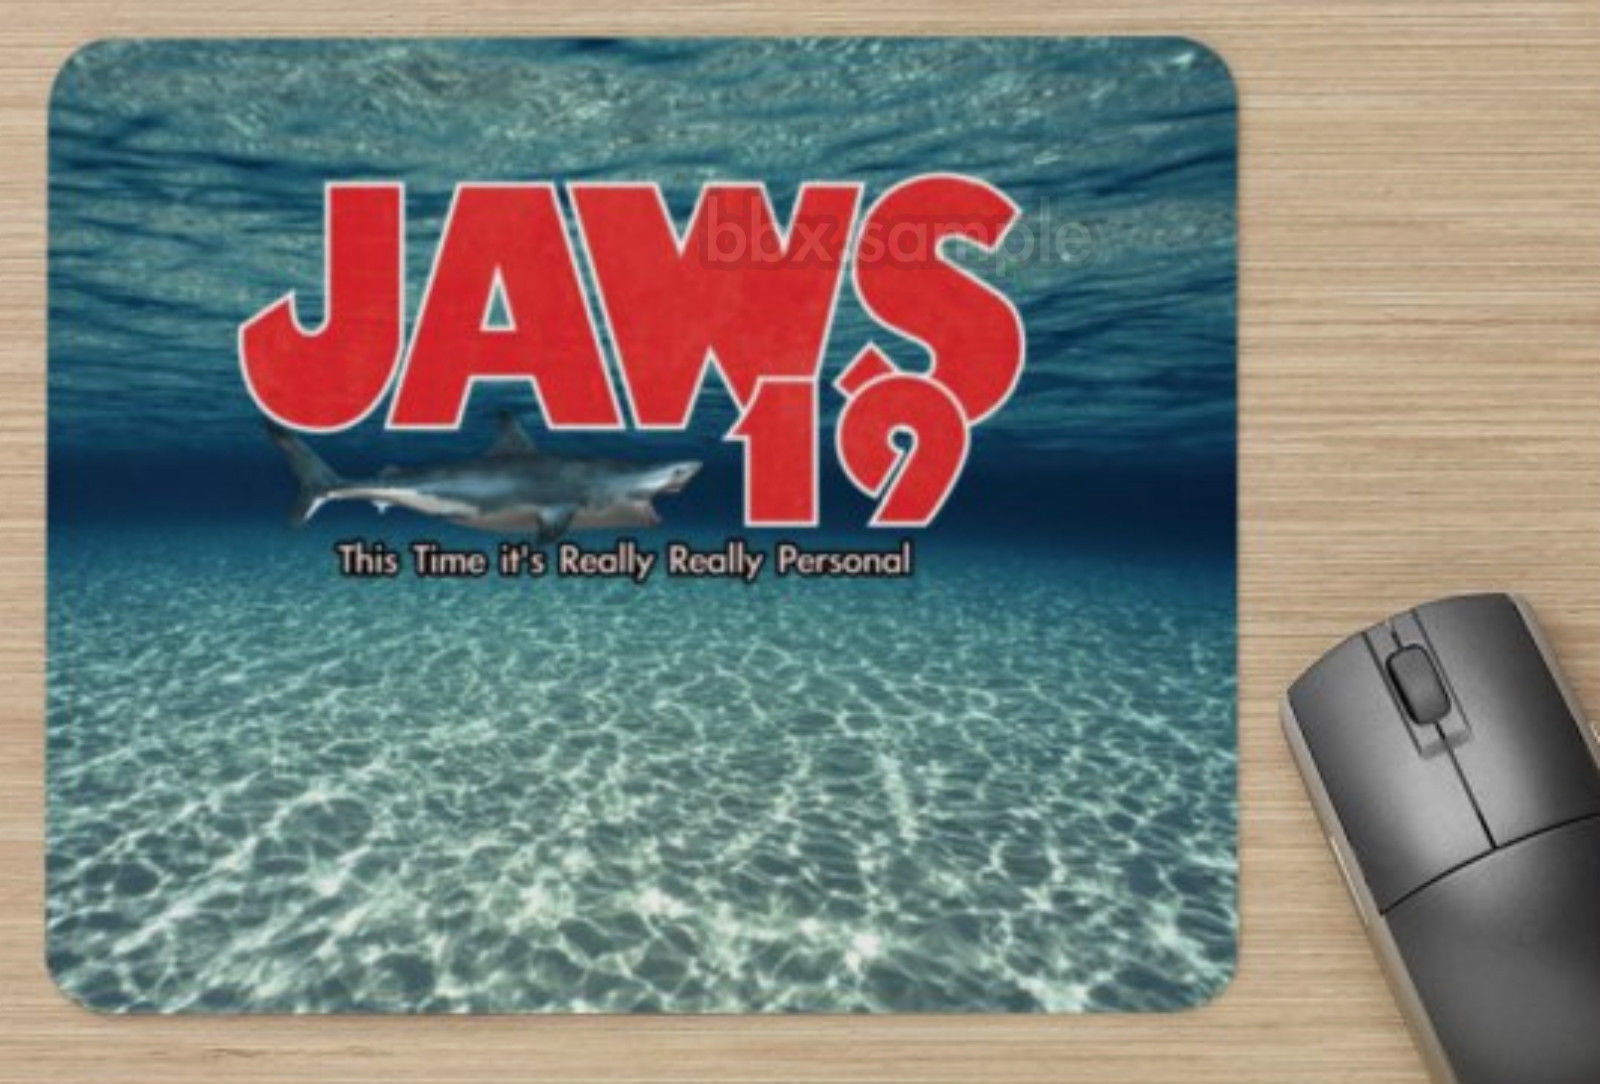 Unofficial BTTF Back to the Future Jaws 19 Mouse Mat - Soft Mouse Mat With Joke Logo Printed On It